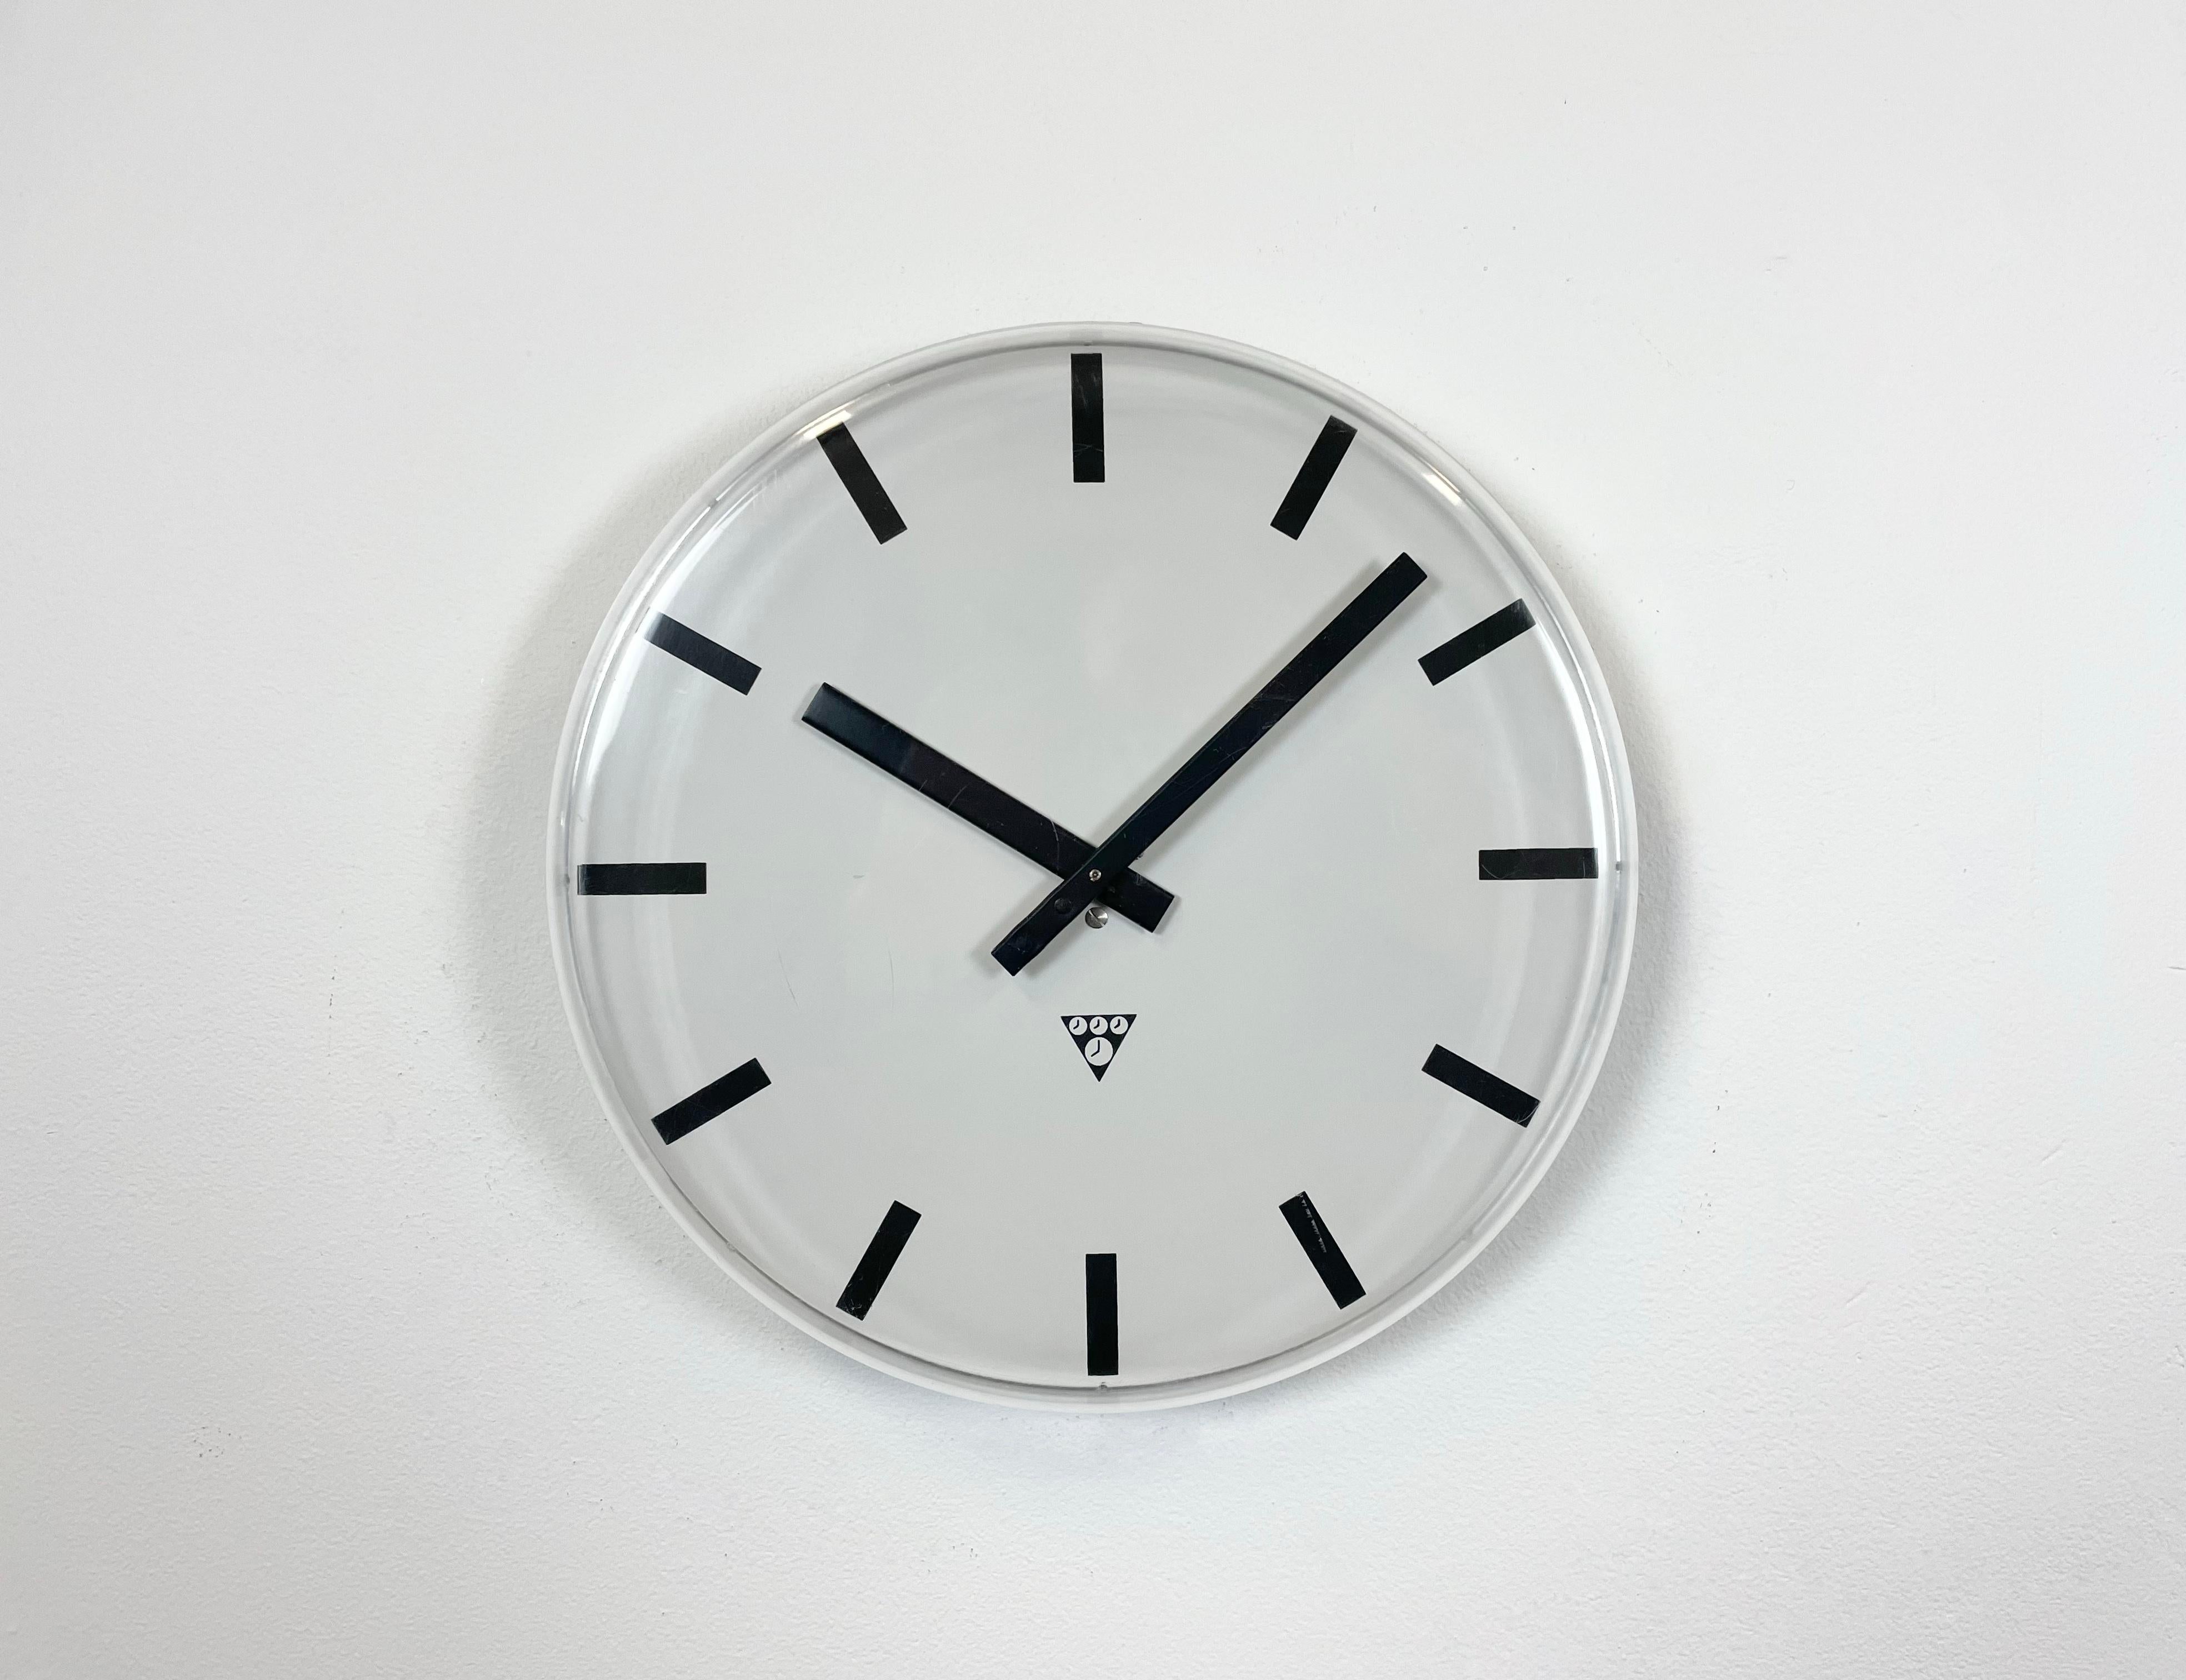 Industrial wall clock was produced by Pragotron in former Czechoslovakia during the 1980s. It features a grey aluminium dial and a curved plastic clear glass cover. The piece has been converted into a battery-powered clockwork and requires only one